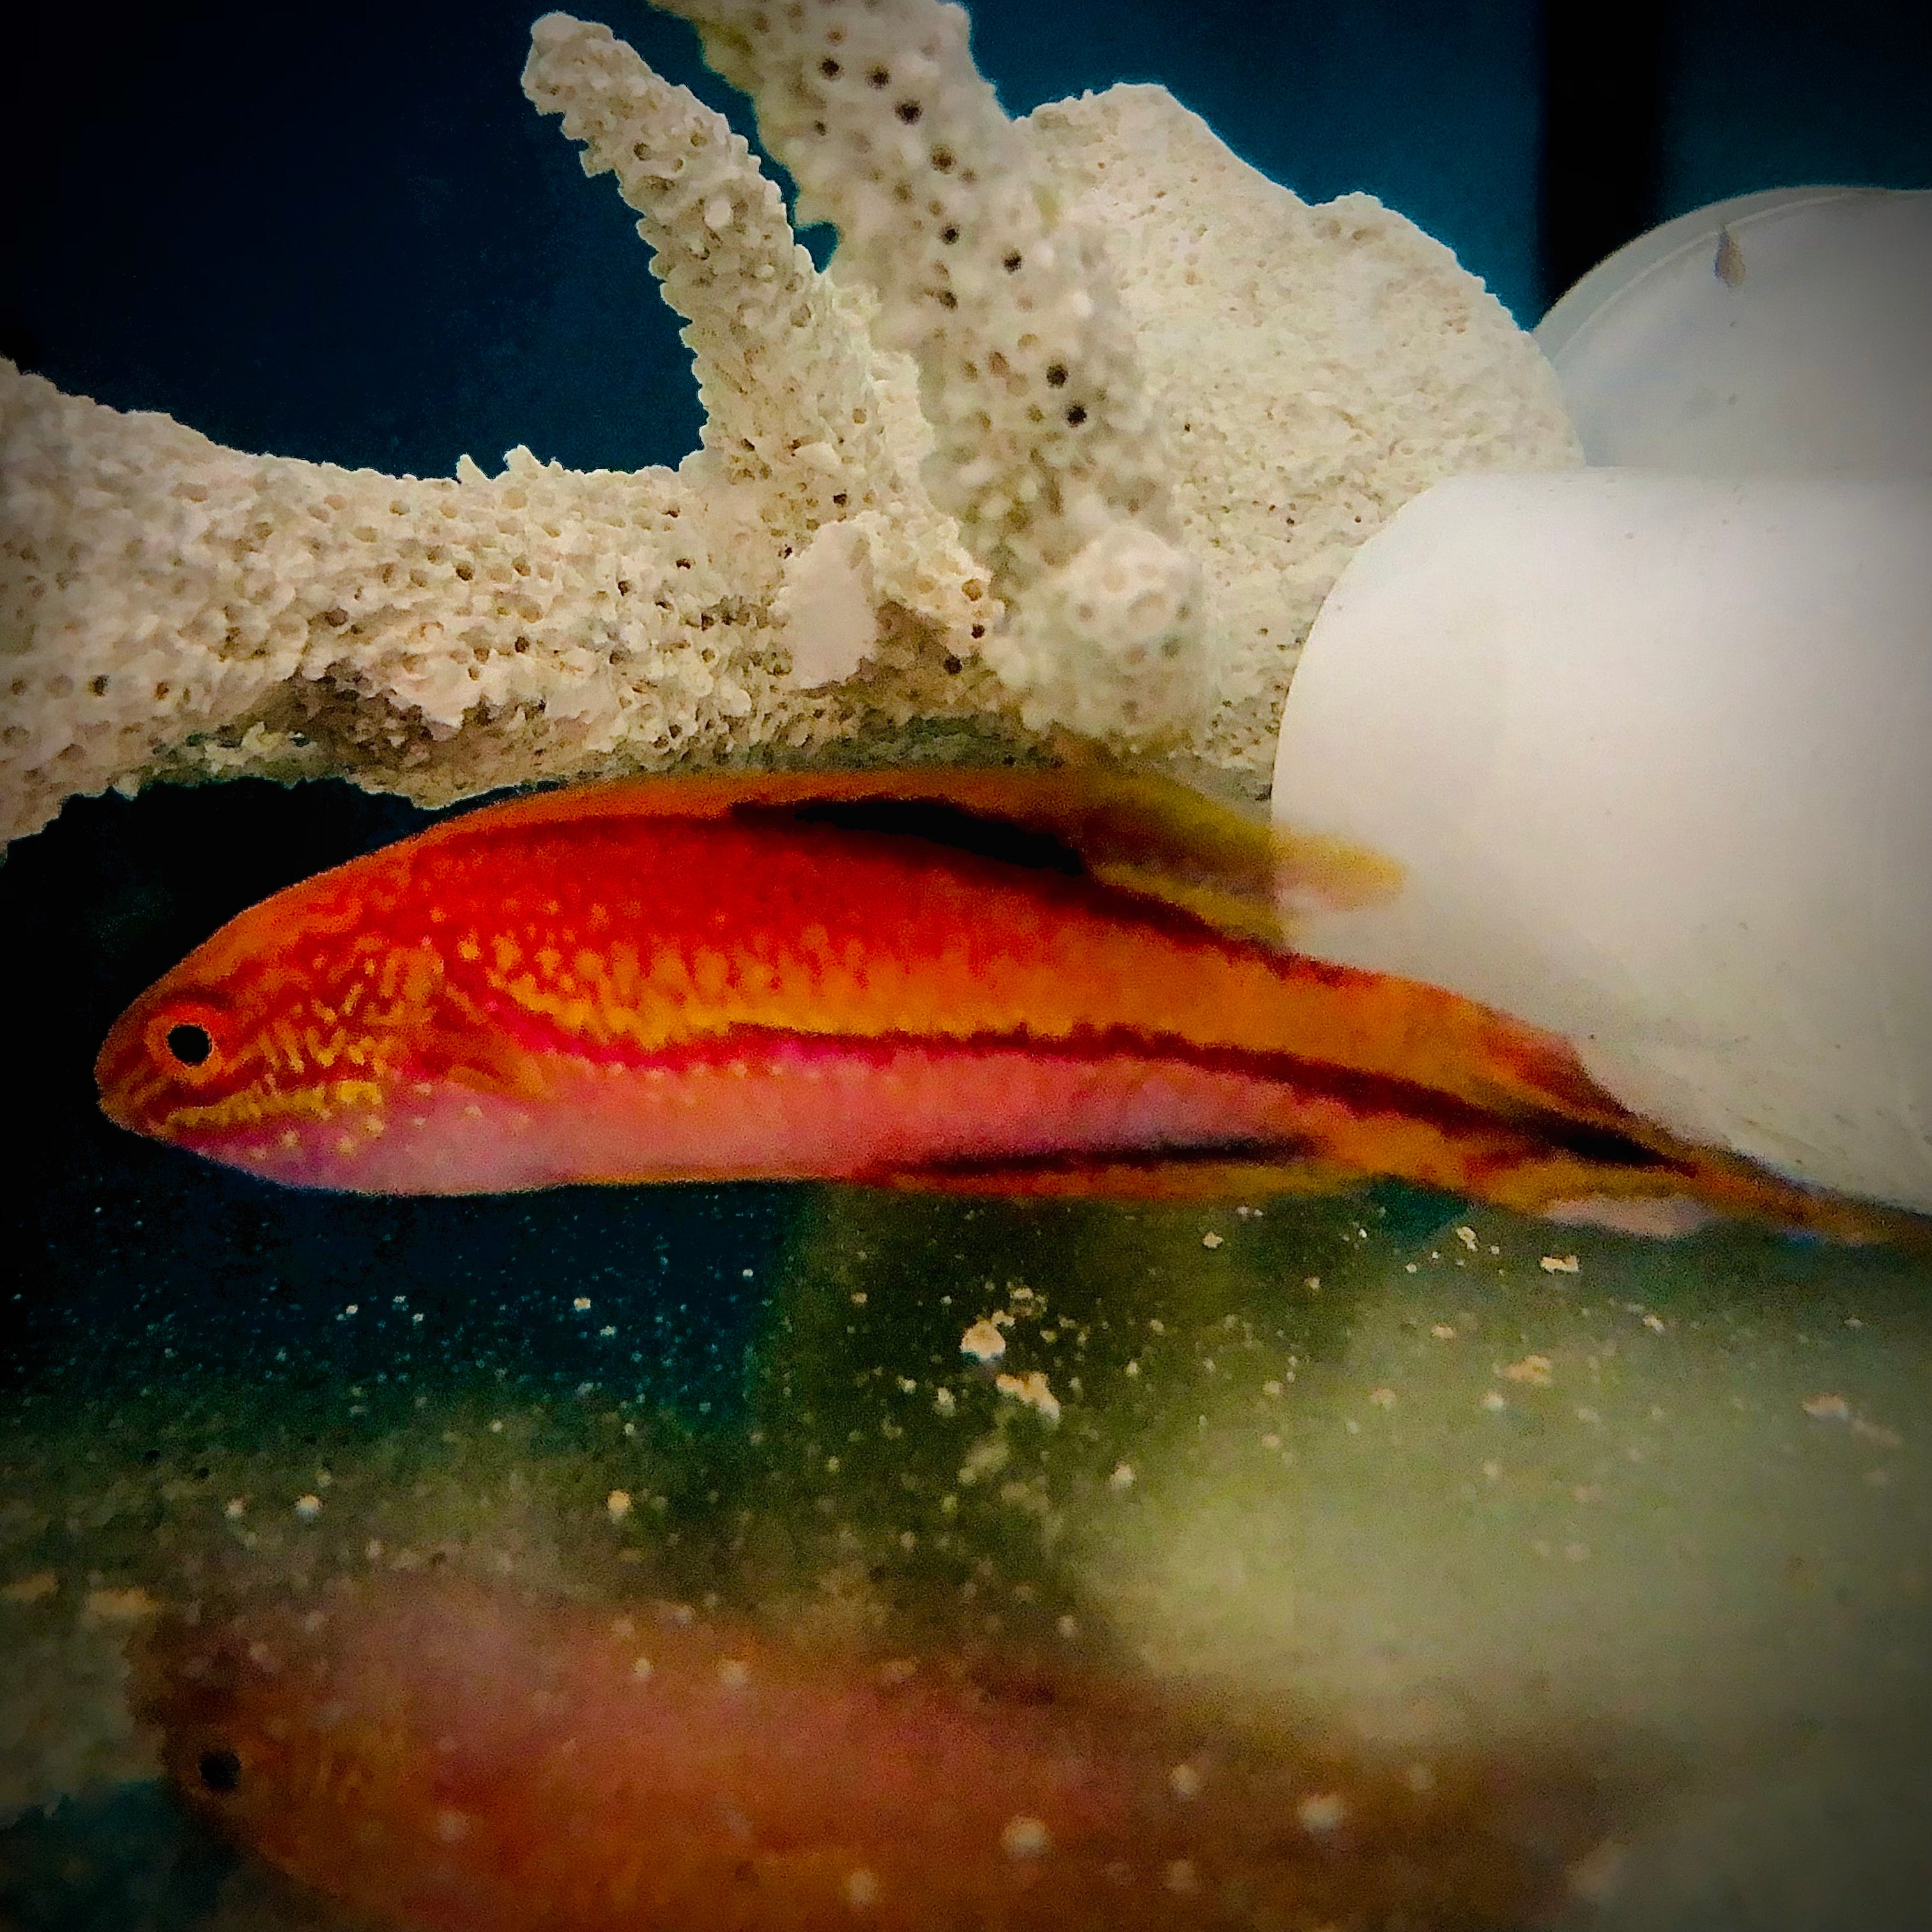 NEW ARRIVAL Aquarium Conditioned-Splendid Pintail Fairy Wrasse (Showy Male)